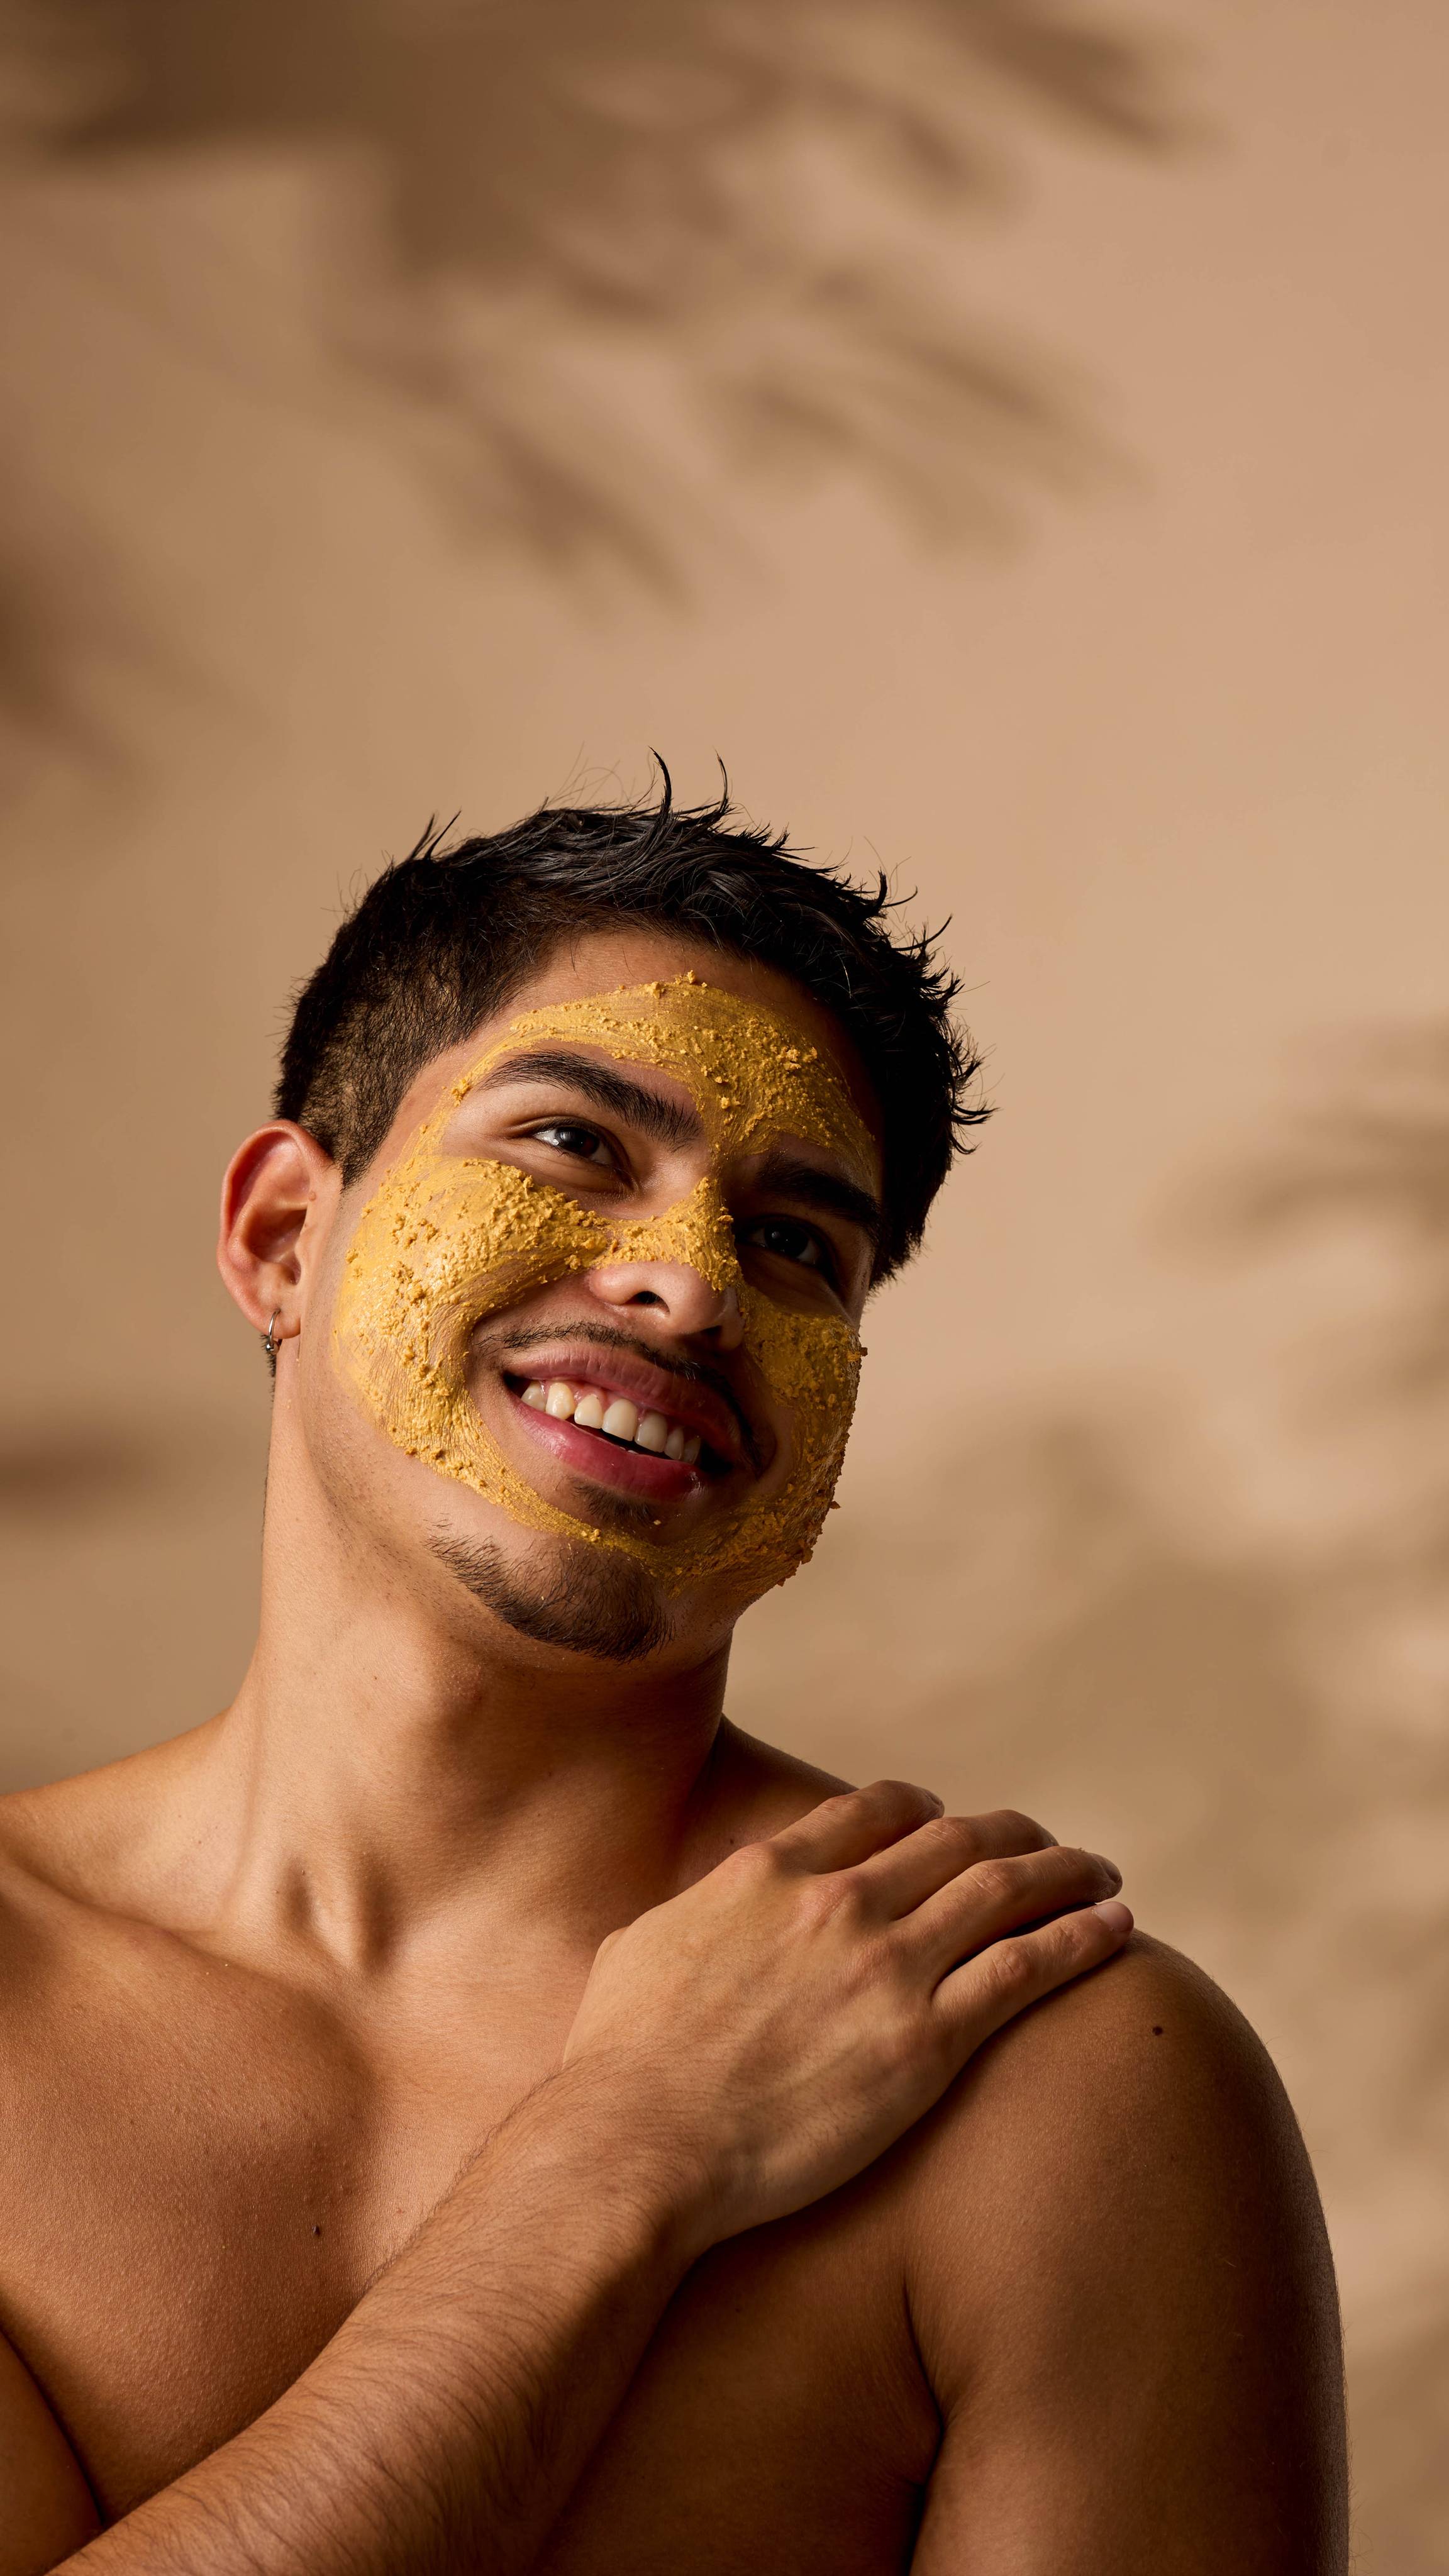 The image shows the model smiling into the distance as their skin is coated with the Turmeric face mask.